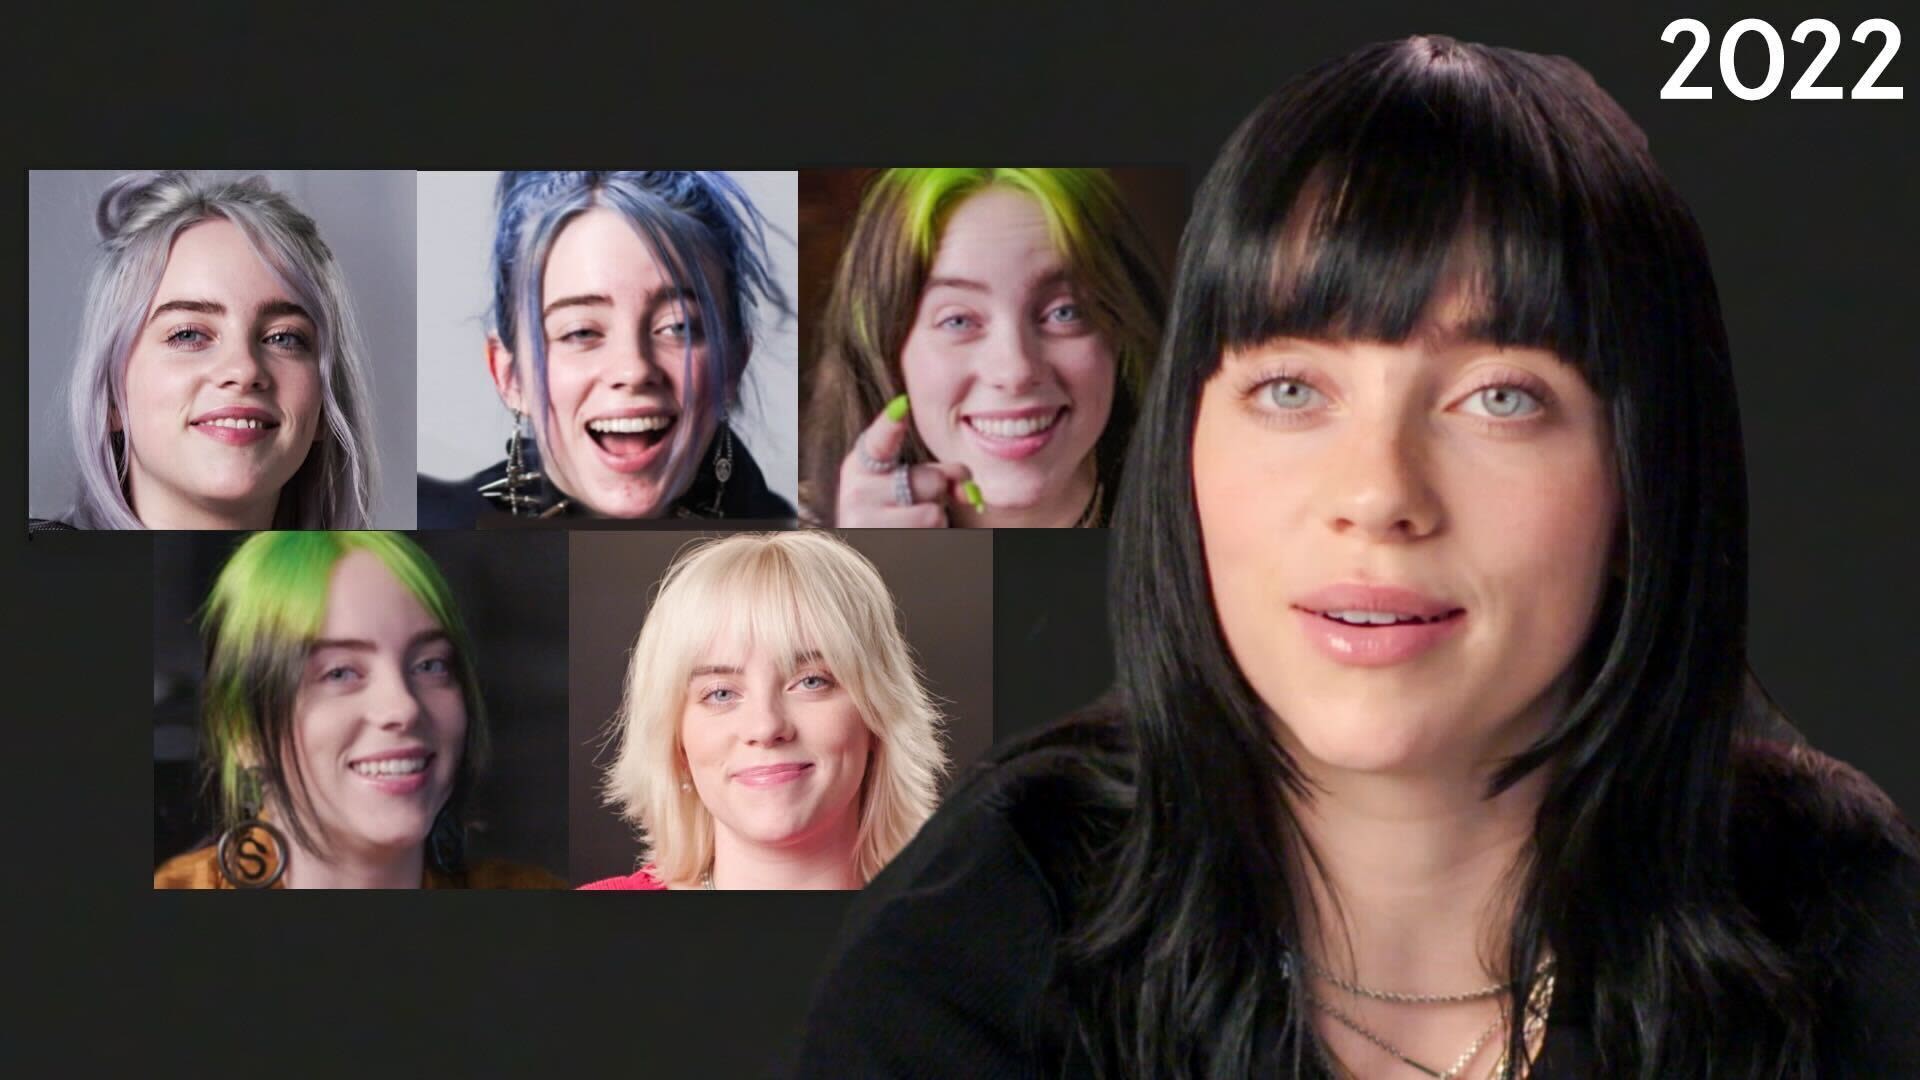 Watch Billie Eilish Same Interview, The Sixth Year Time Capsule